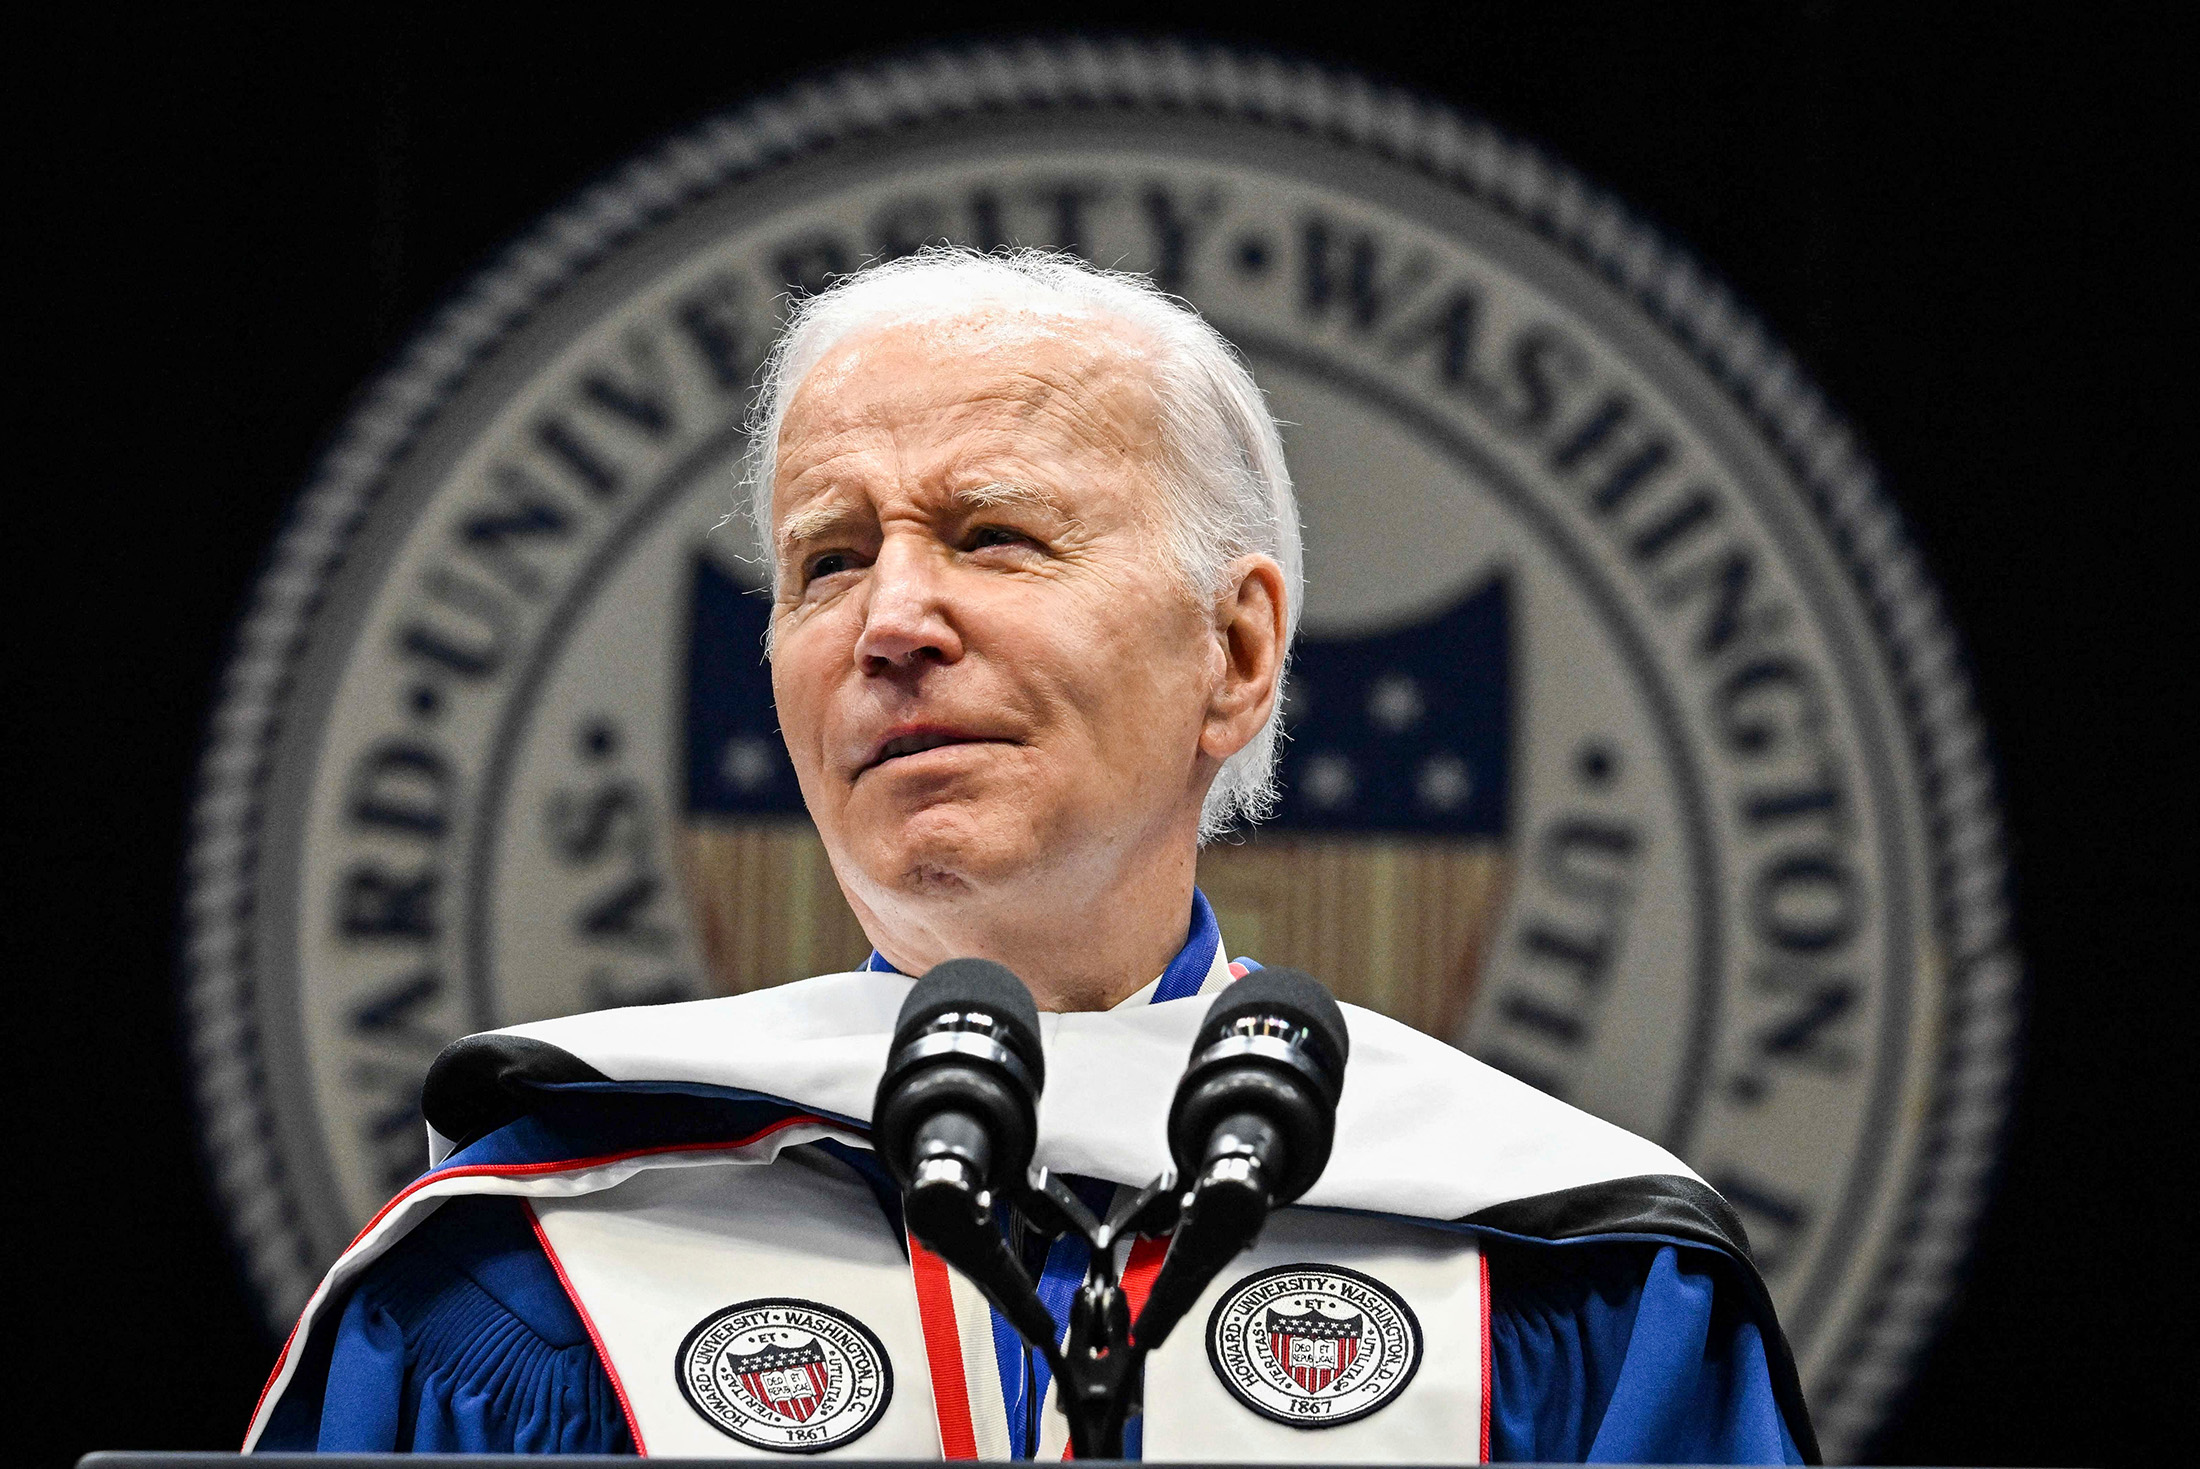 President Joe Biden delivers the commencement address during the Howard University graduation ceremony at Capitol One Arena in Washington, DC, on May 13.